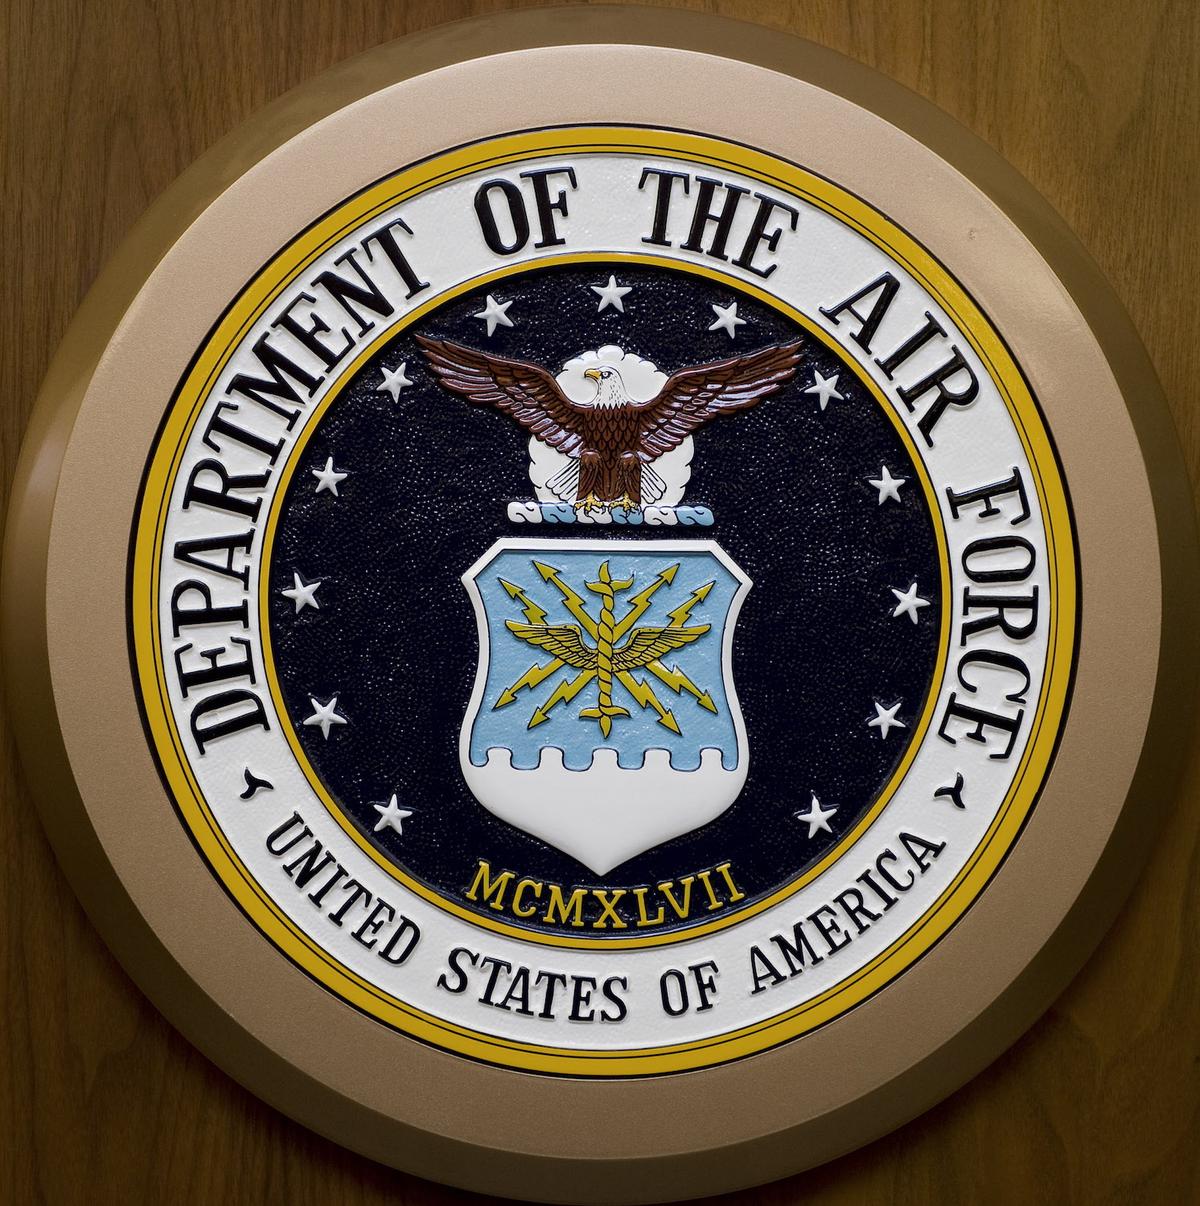 Air Force to Conduct Review on Threat of Extremism in Service